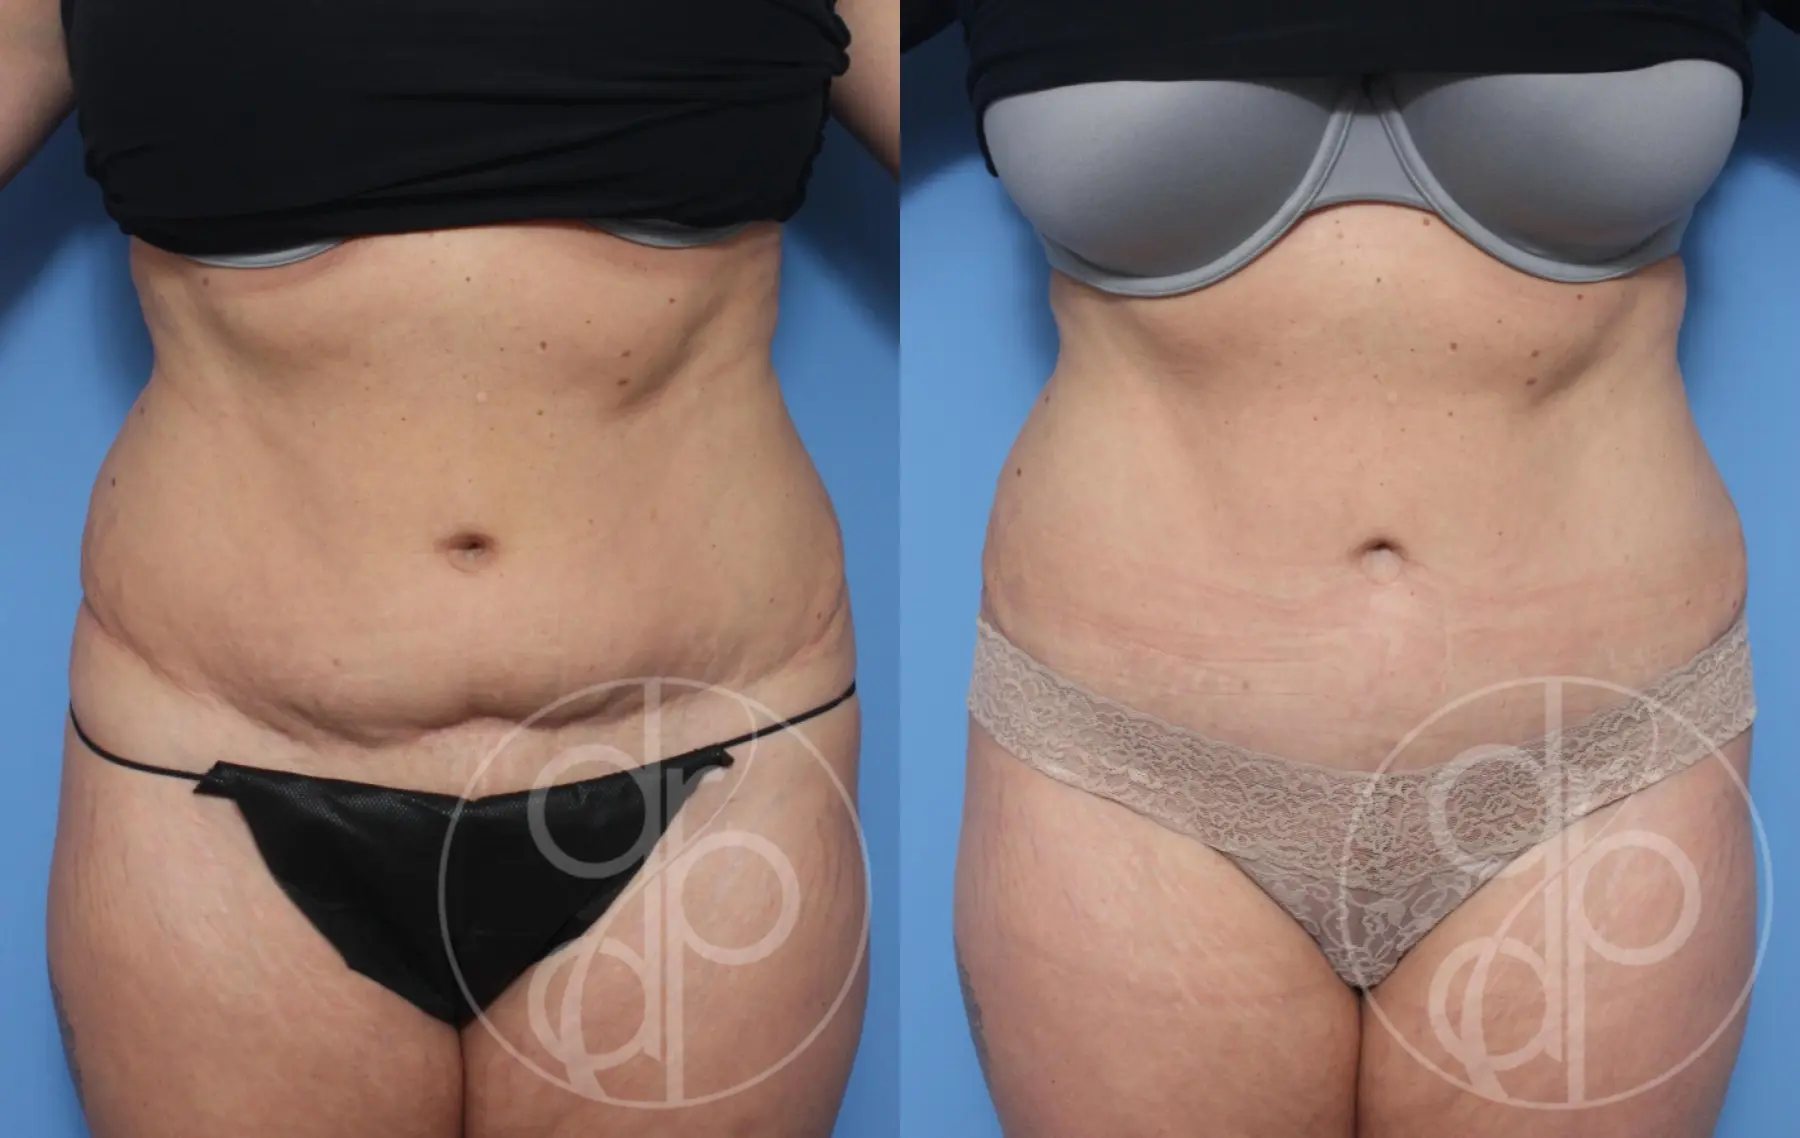 Abdominoplasty-revision: Patient 1 - Before and After  